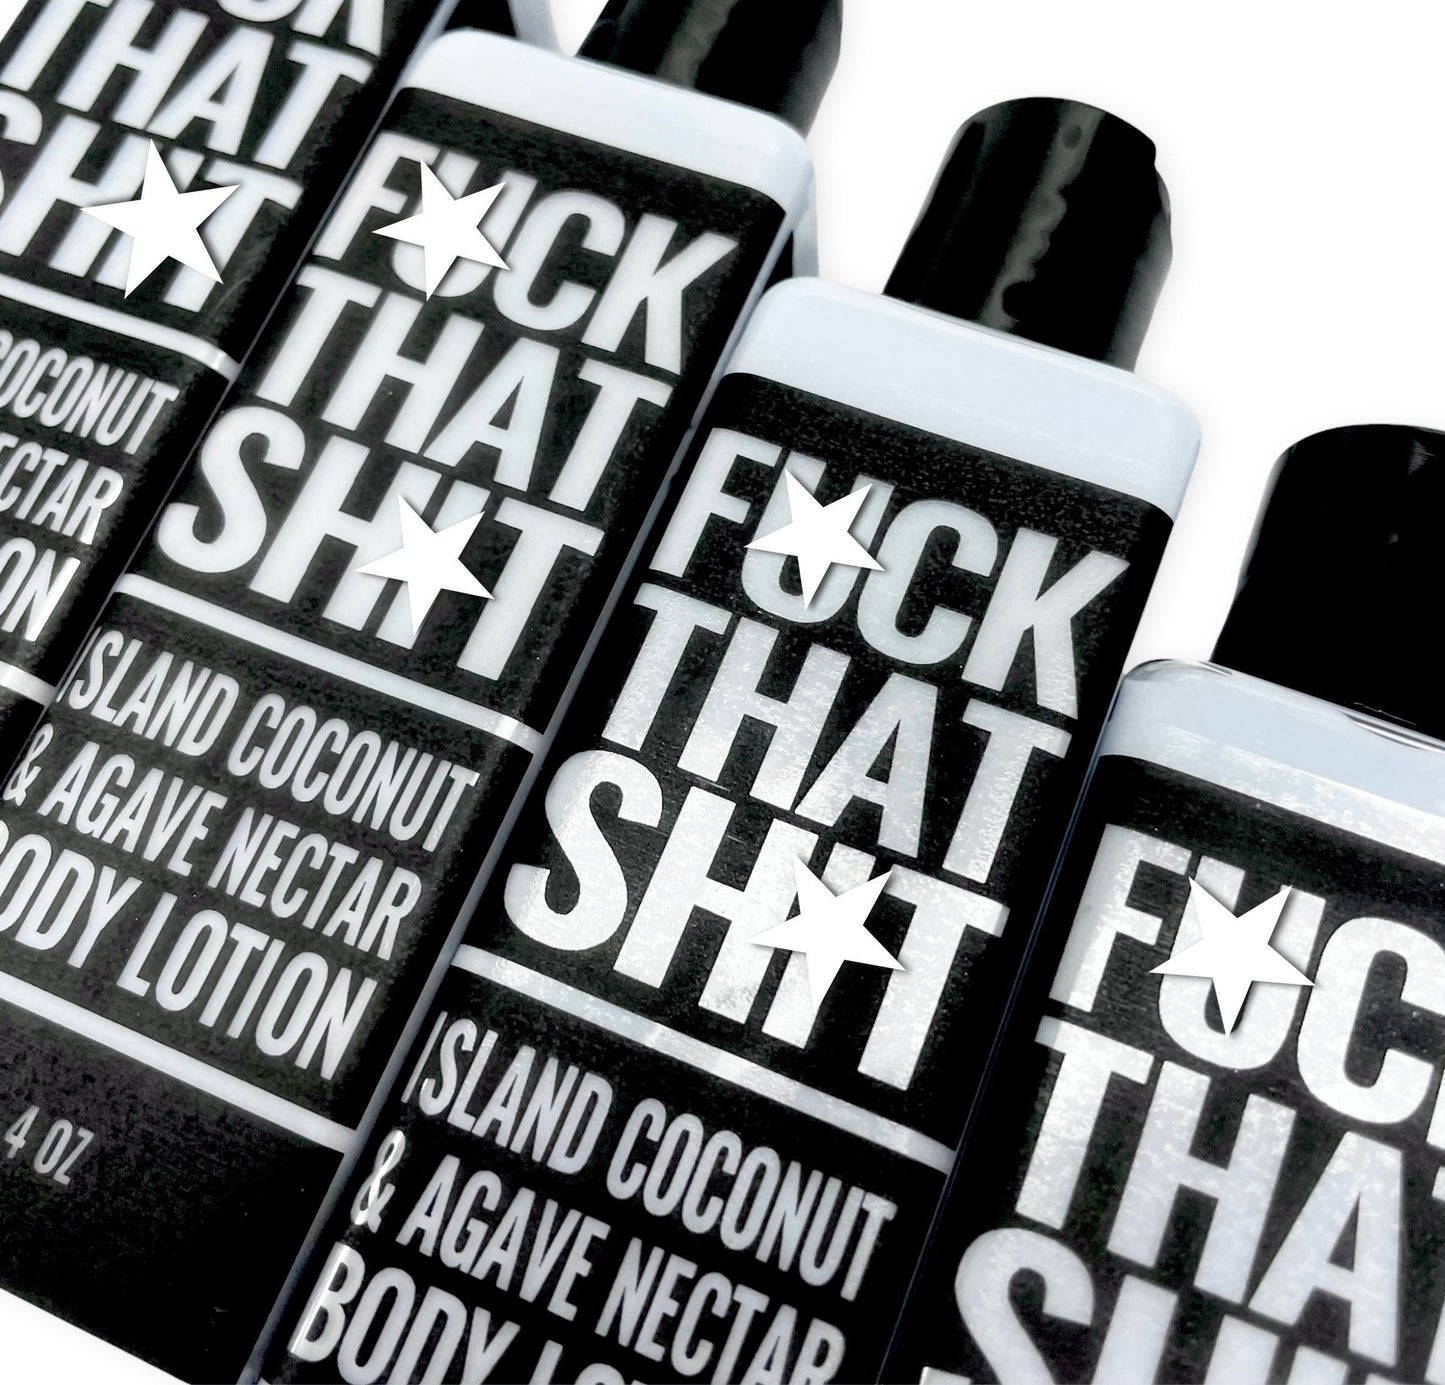 Fuck That Shit Hand & Body Lotion